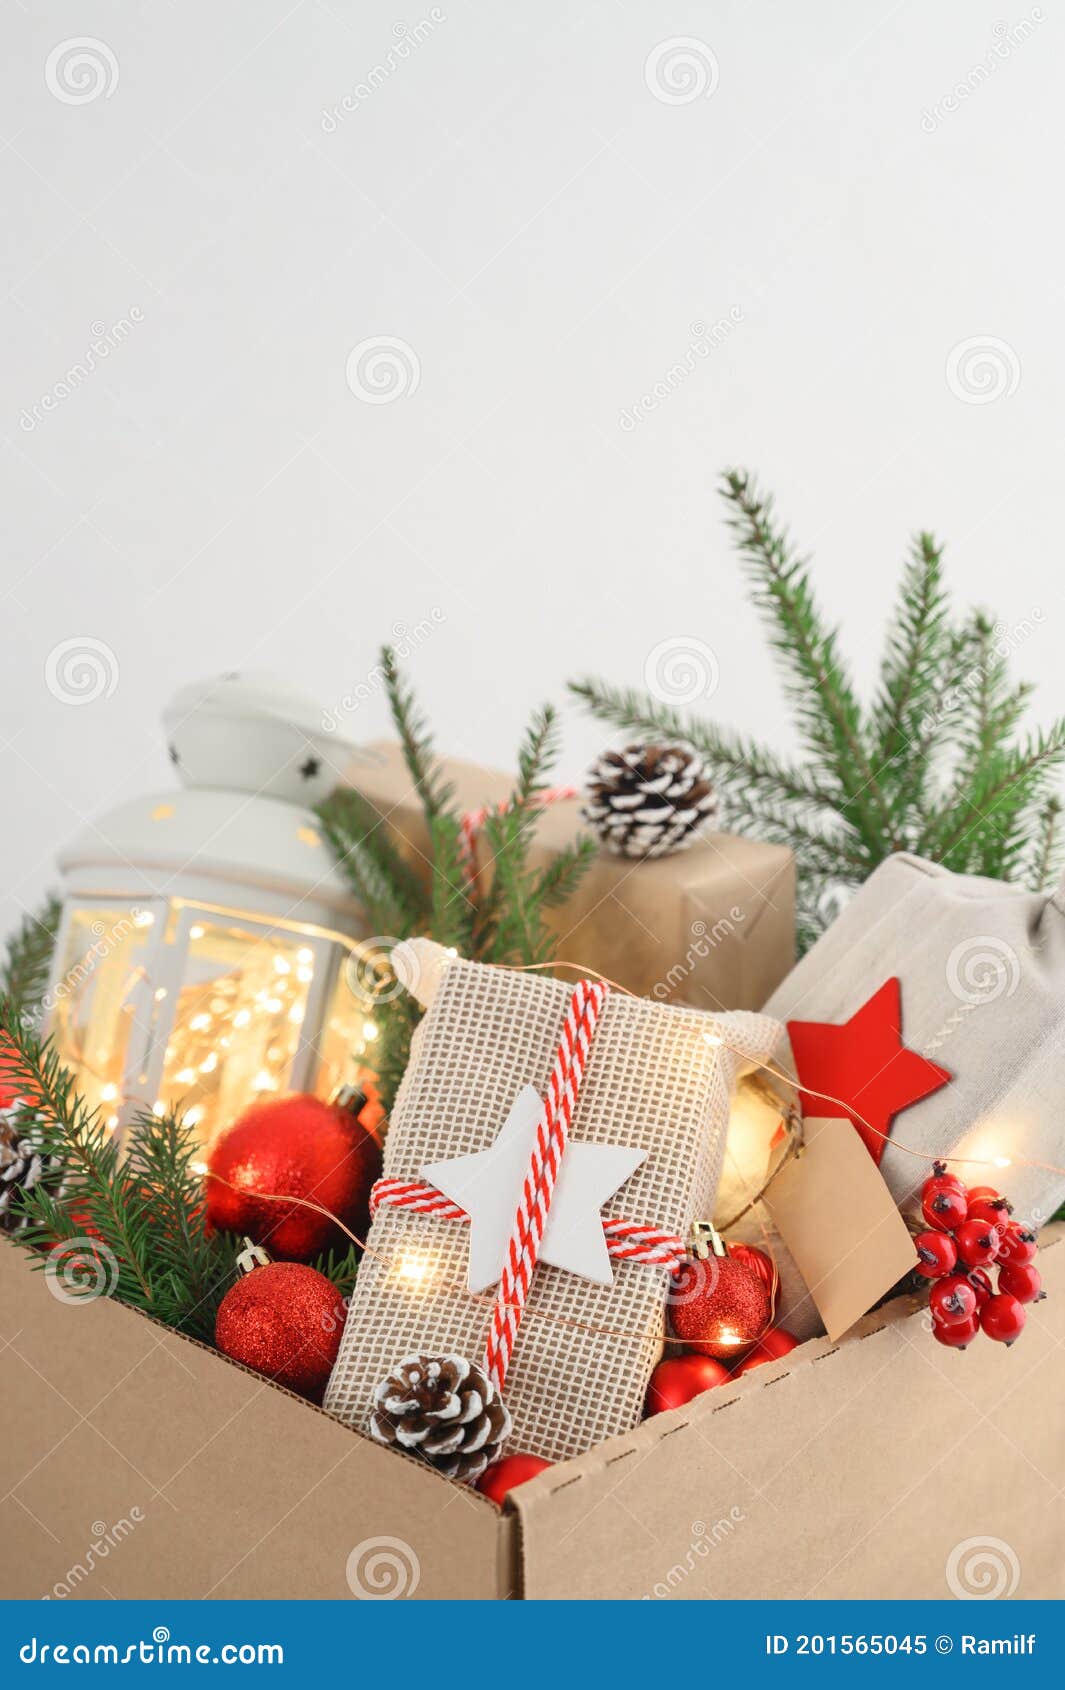 Christmas Gifts in Eco-friendly Reusable Packaging and Decorations ...